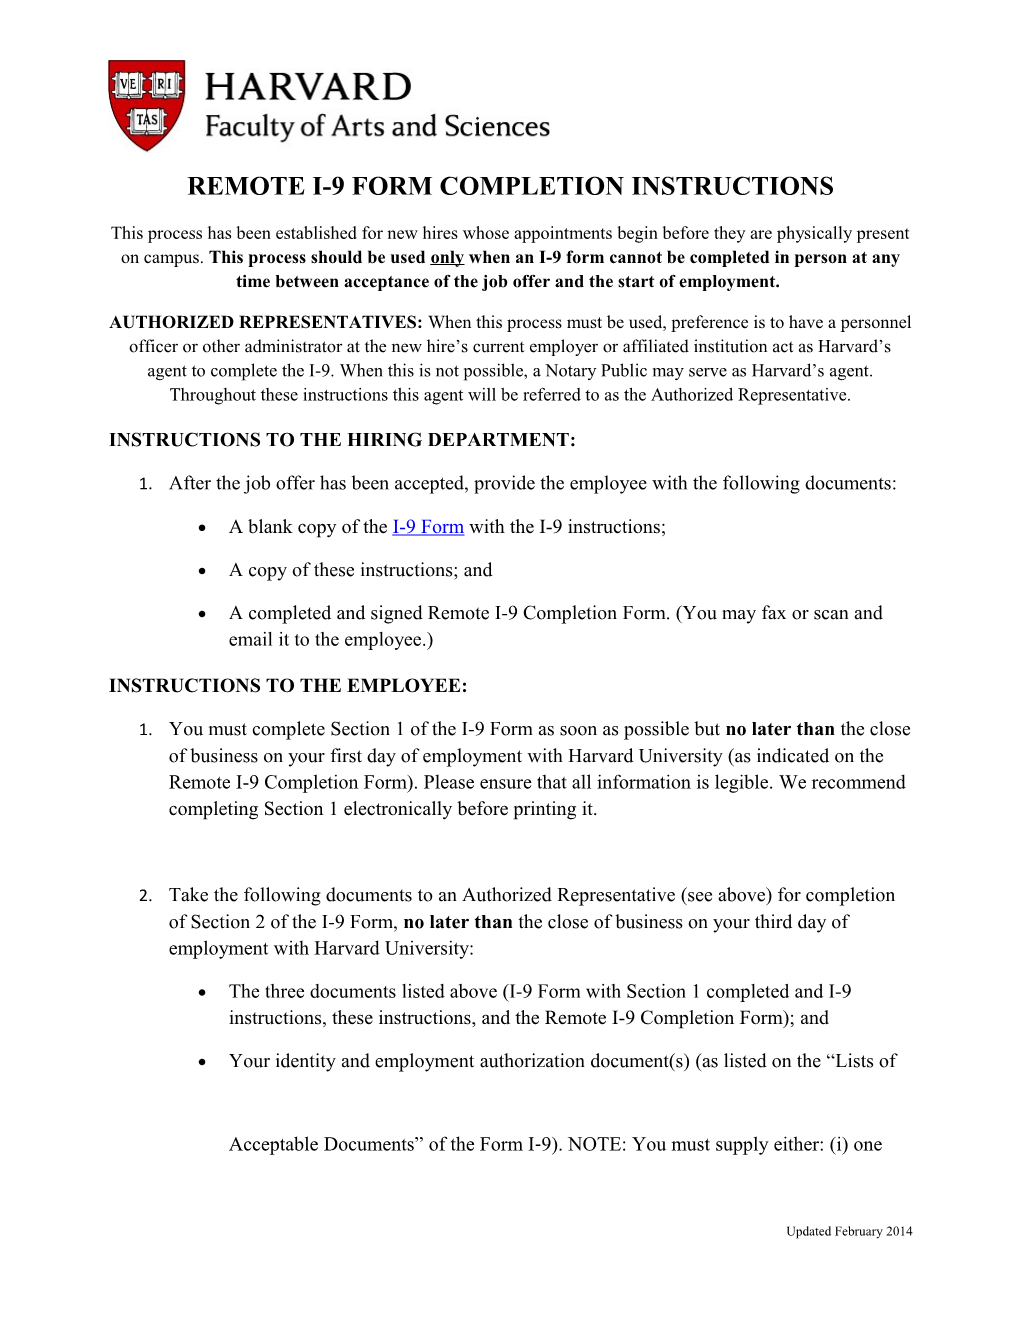 Remote I-9 Form Completion Instructions